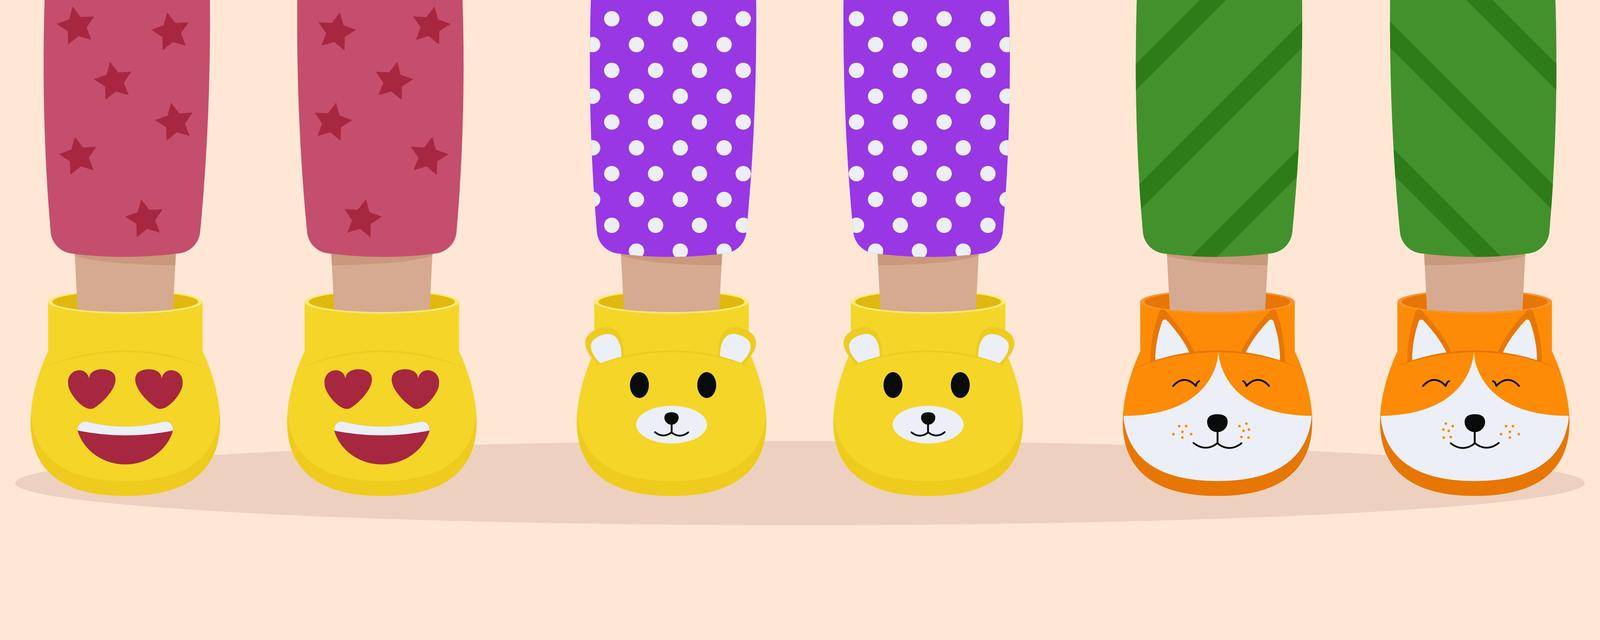 Set of children pajama slippers. Children feet in funny slippers. Pajama party. by anna_orlova